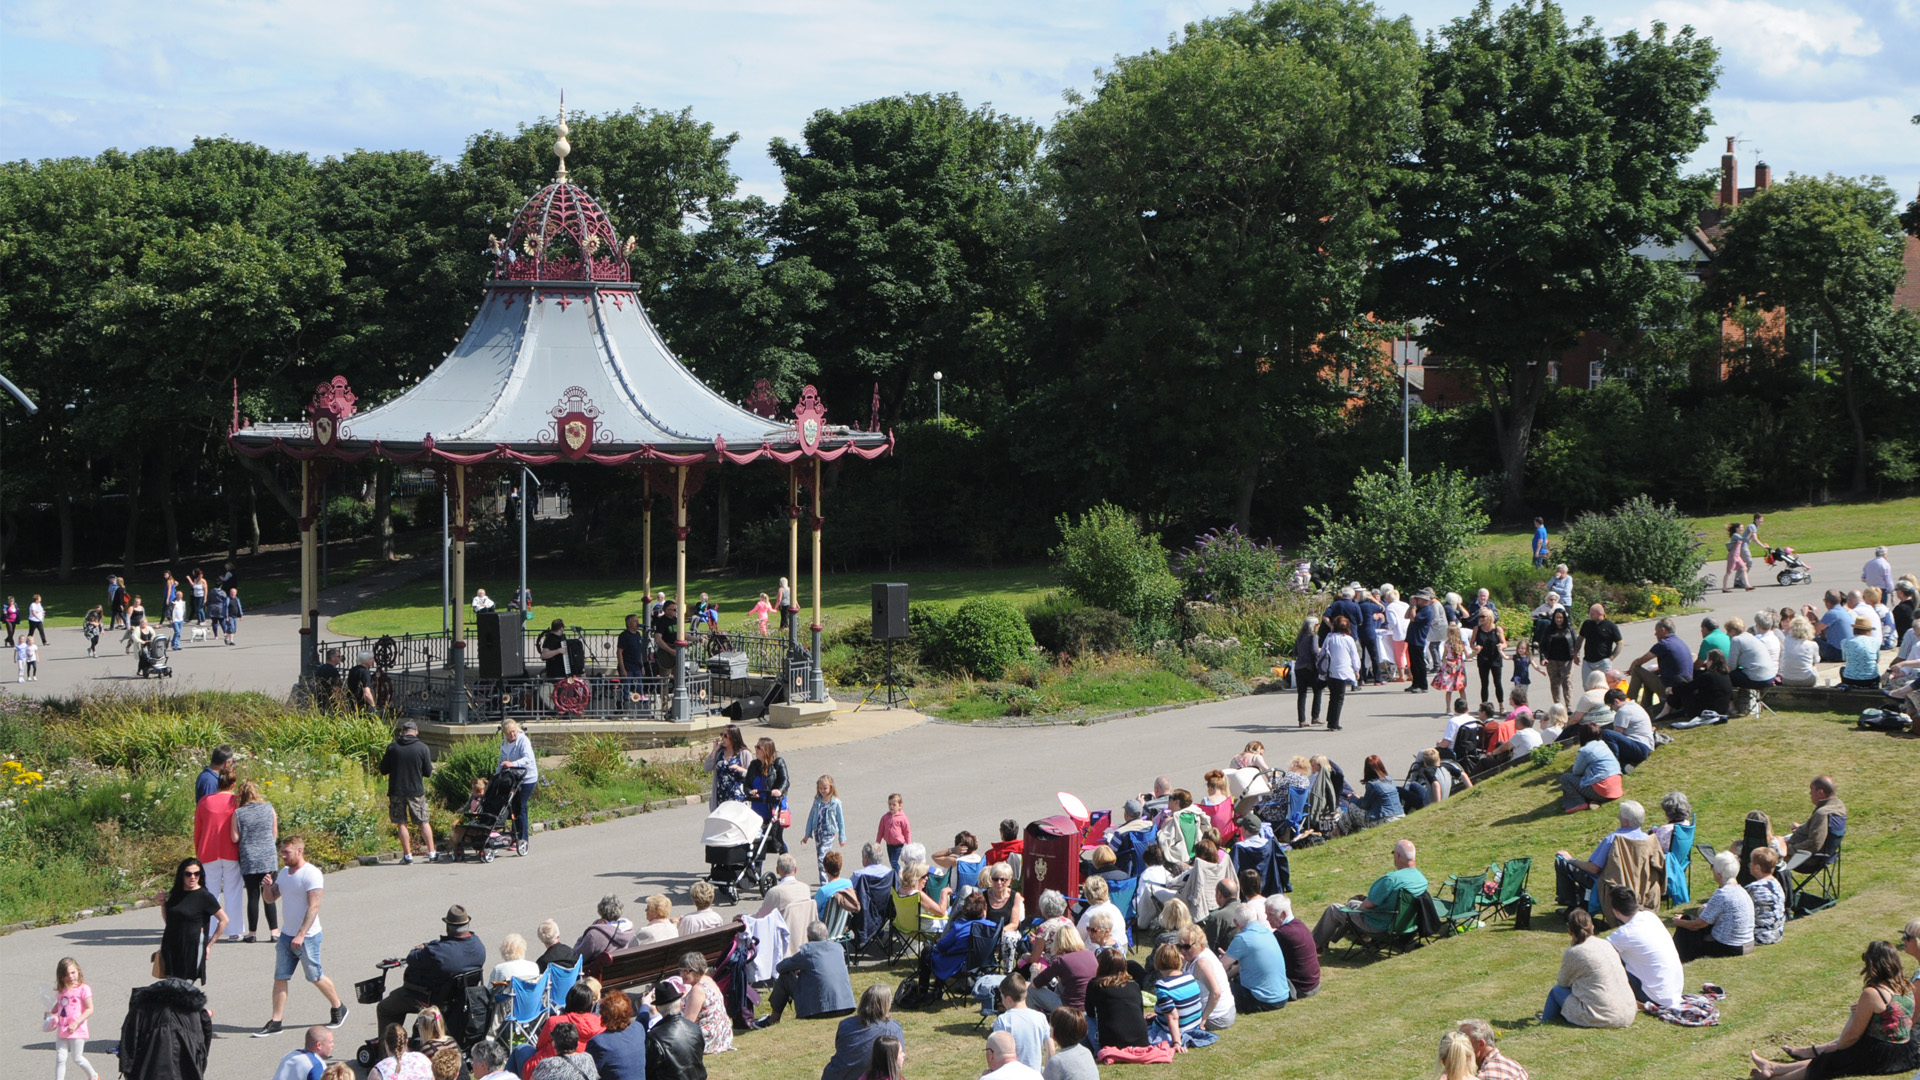 People gathered on a grassy hill, watching a performance on a band stand